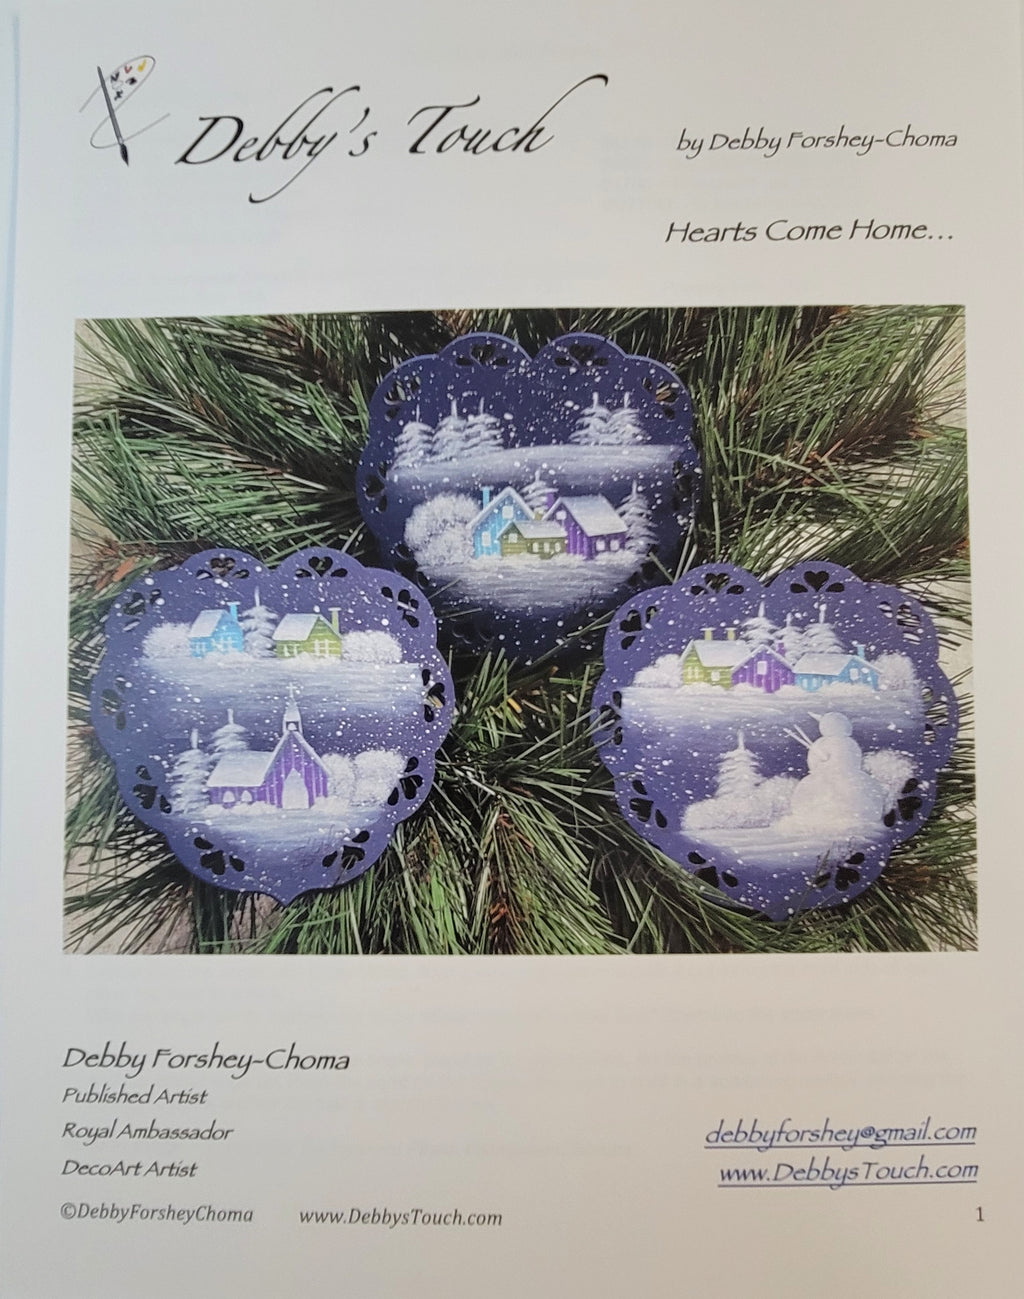 Hearts Come Home packet by Debby Forshey-Choma